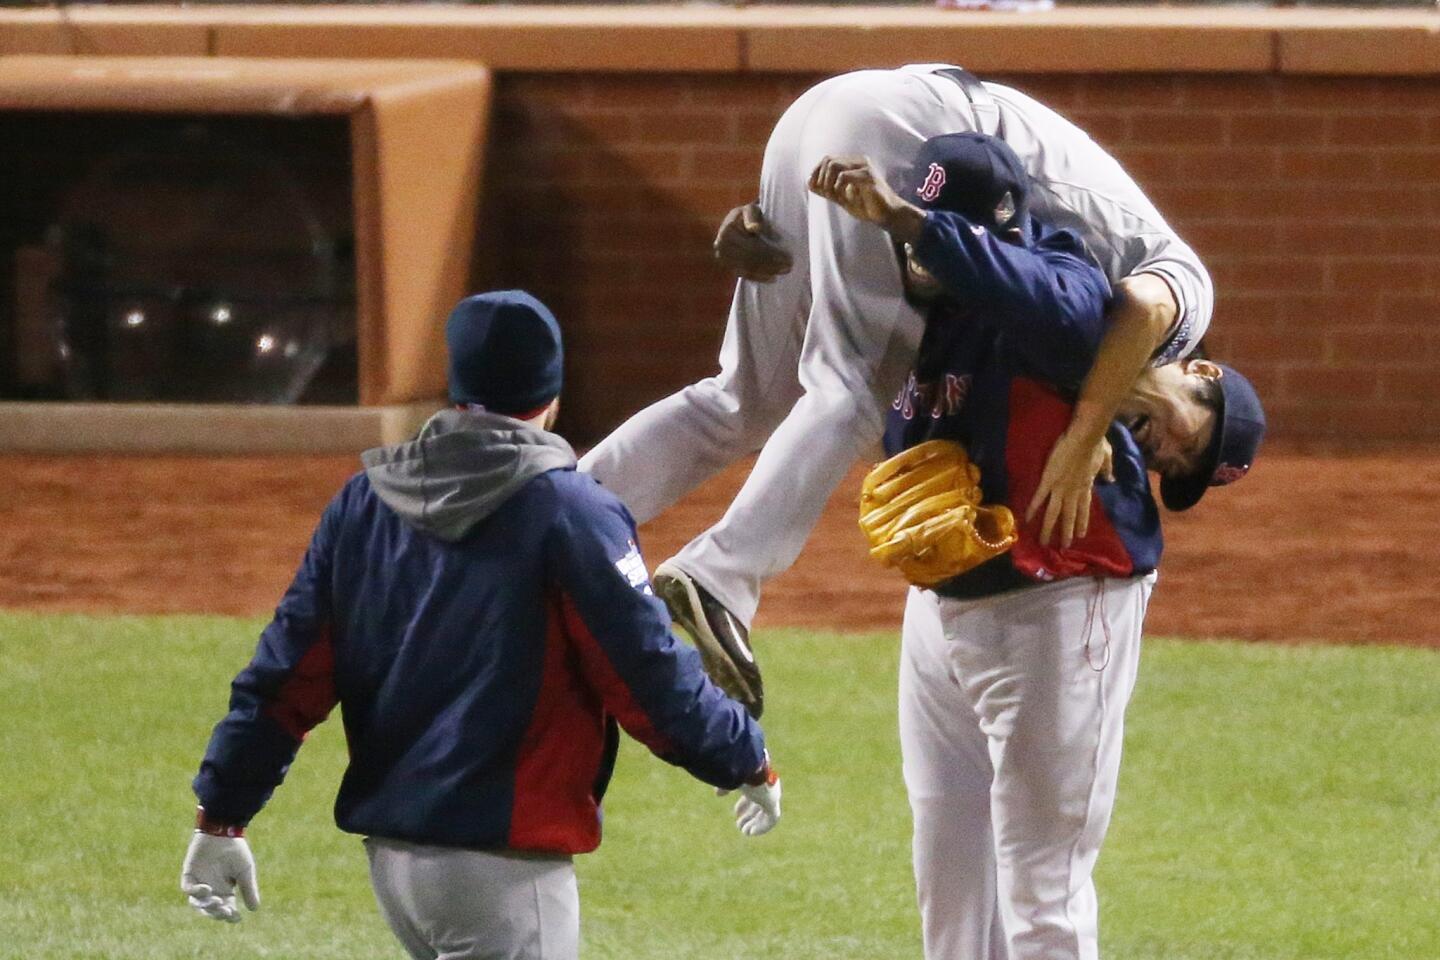 Red Sox first slugger David Ortiz lifts closer Koji Uehara after a 4-2 victory over the St. Louis Cardinals in Game 4 of the World Series on Sunday night at Busch Stadium.